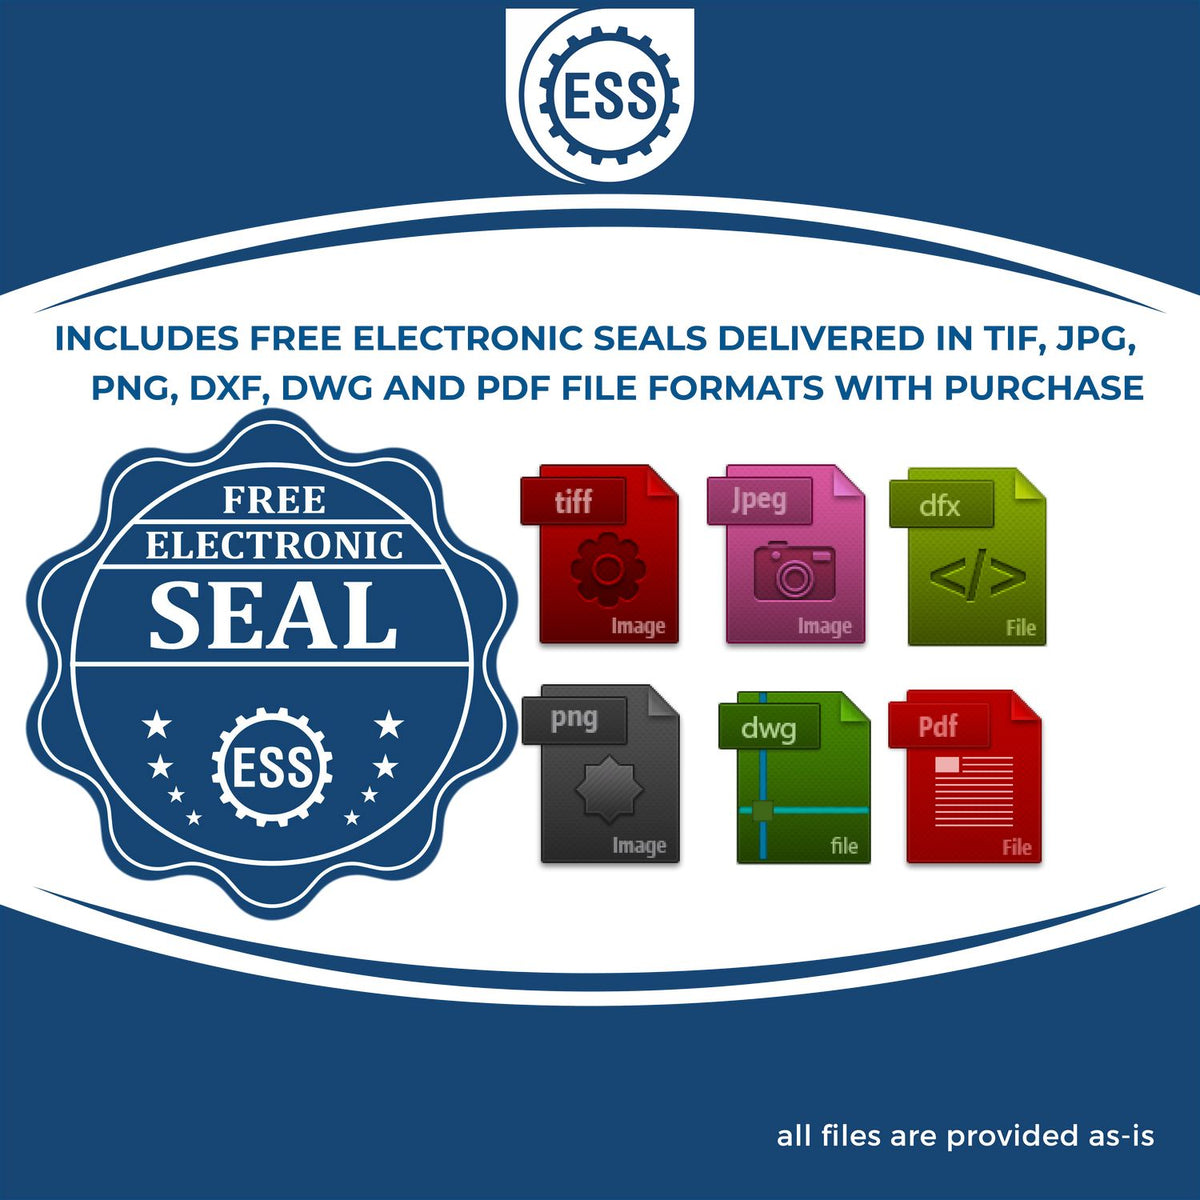 An infographic for the free electronic seal for the New York Professional Geologist Seal Stamp illustrating the different file type icons such as DXF, DWG, TIF, JPG and PNG.